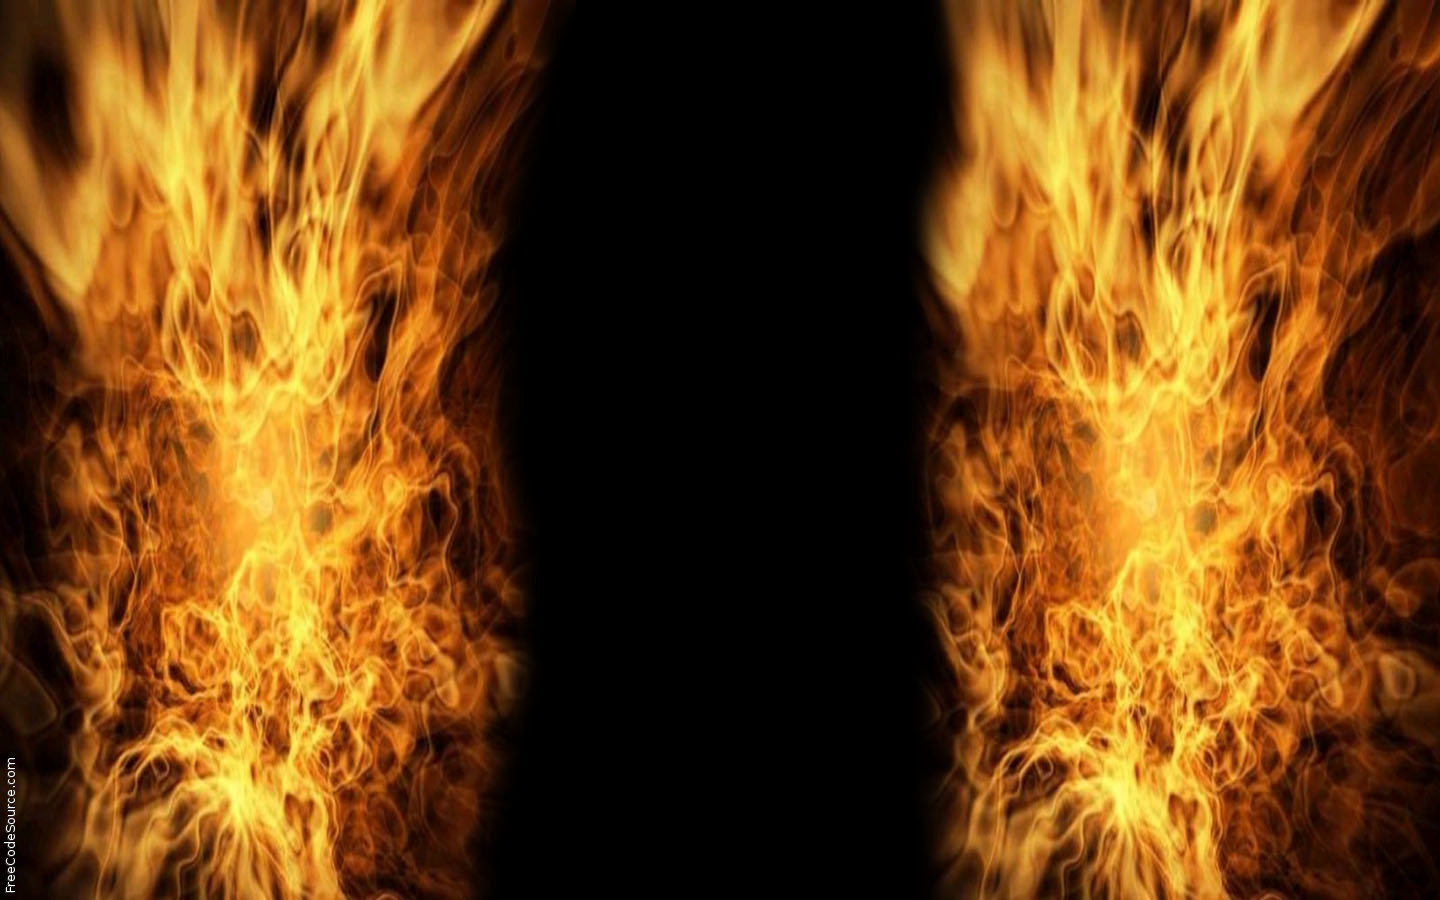 in flames wallpaper,flame,fire,heat,yellow,event